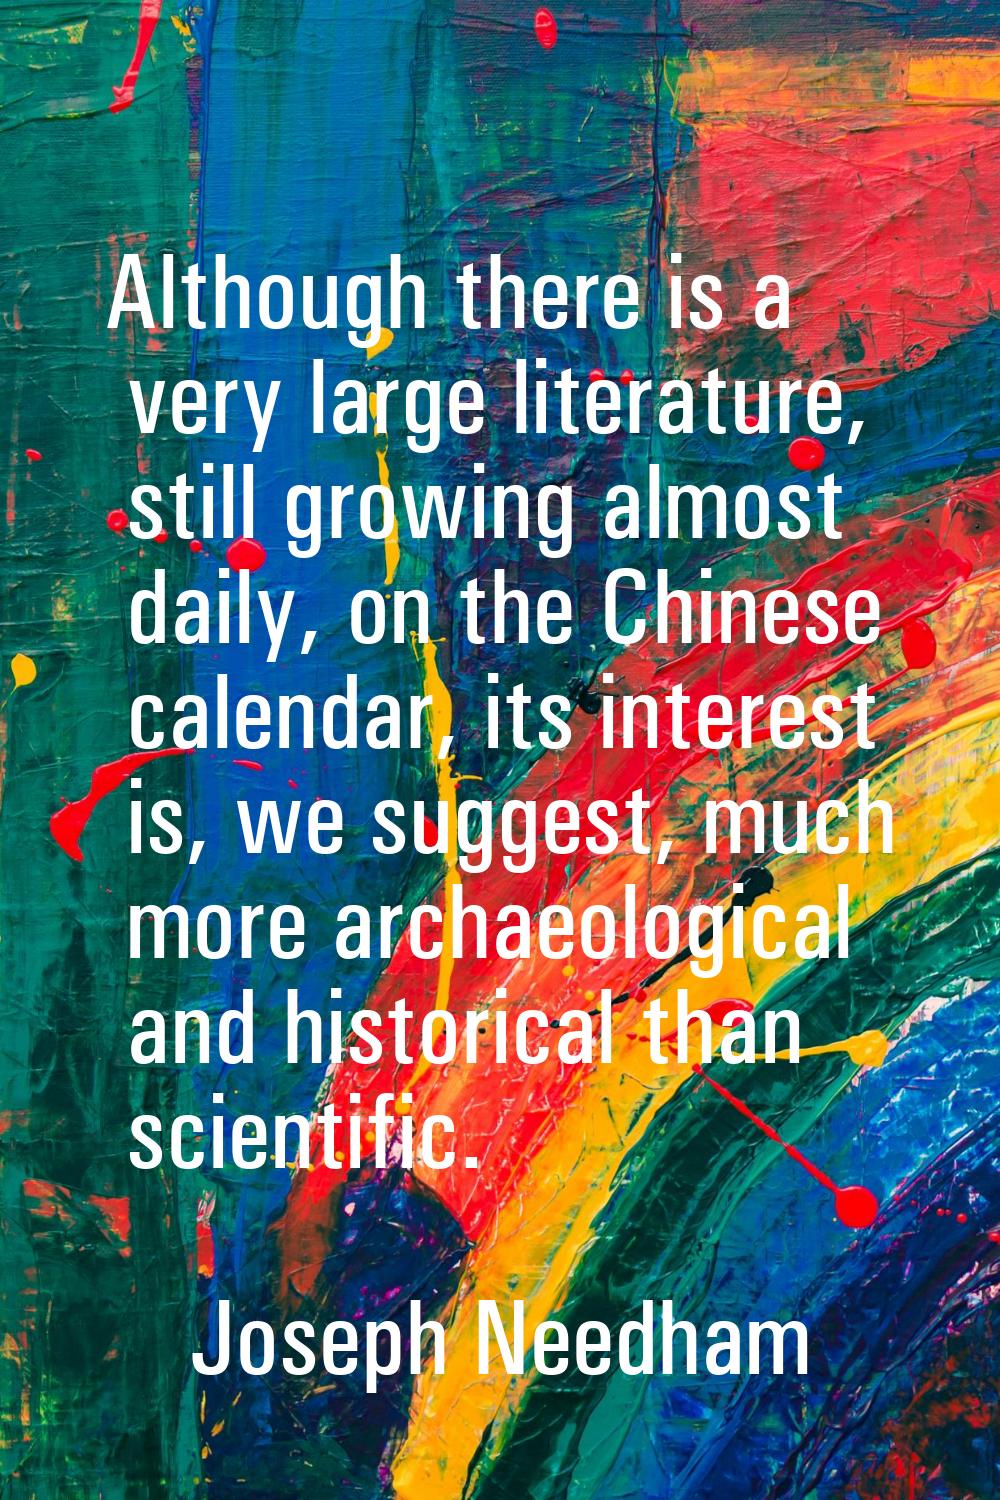 Although there is a very large literature, still growing almost daily, on the Chinese calendar, its